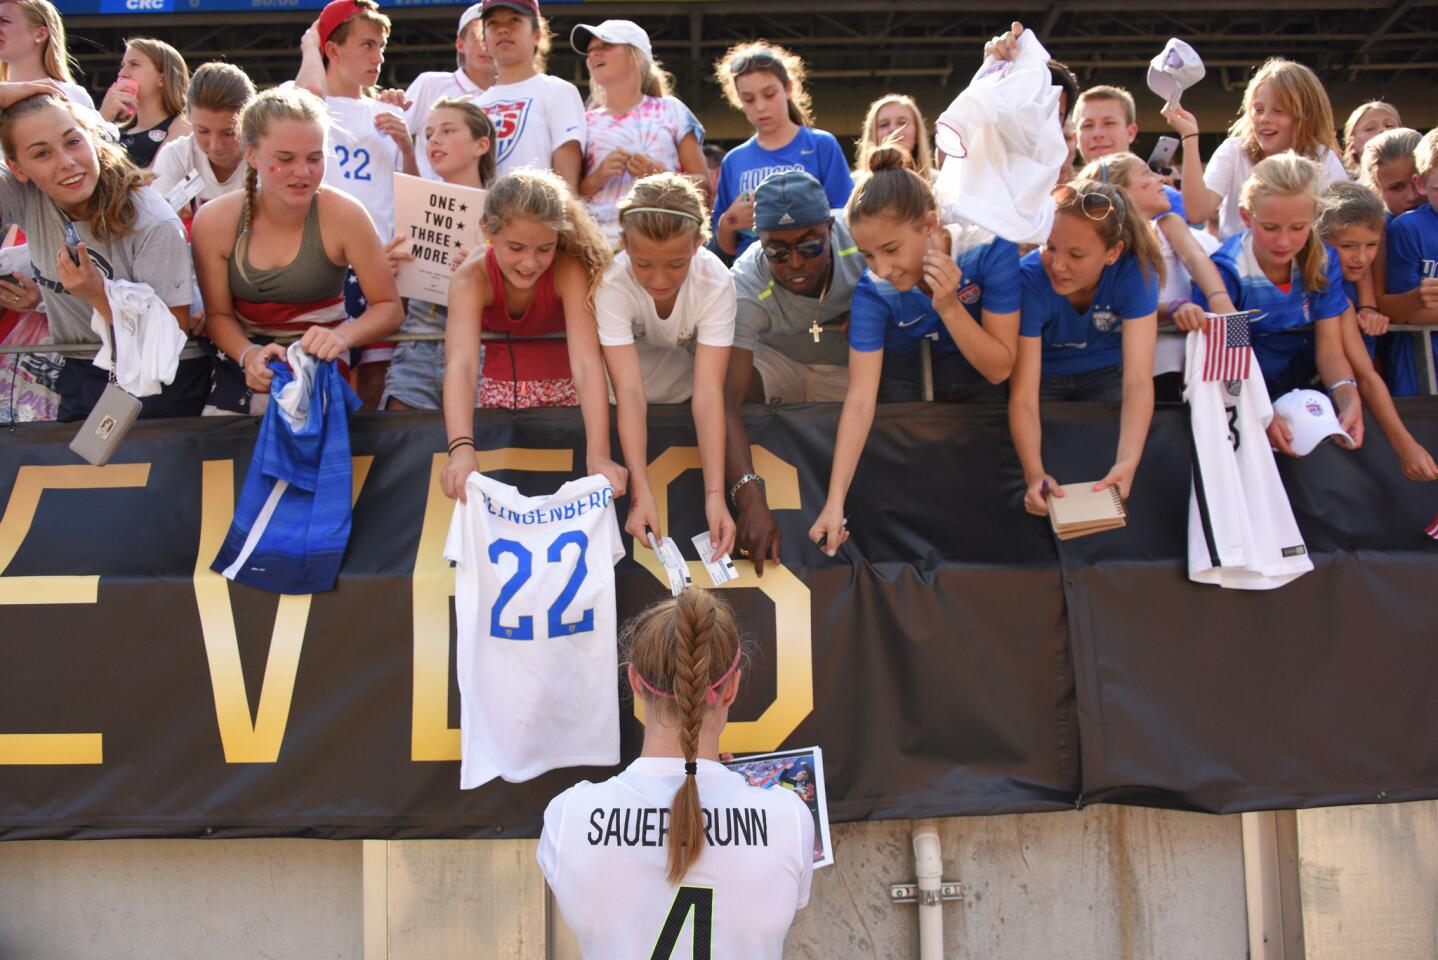 United States defender Becky Sauerbrunn (4) signs autographs following a women's friendly soccer match against Costa Rica, Sunday, Aug. 16, 2015, in Pittsburgh. (AP Photo/Don Wright)